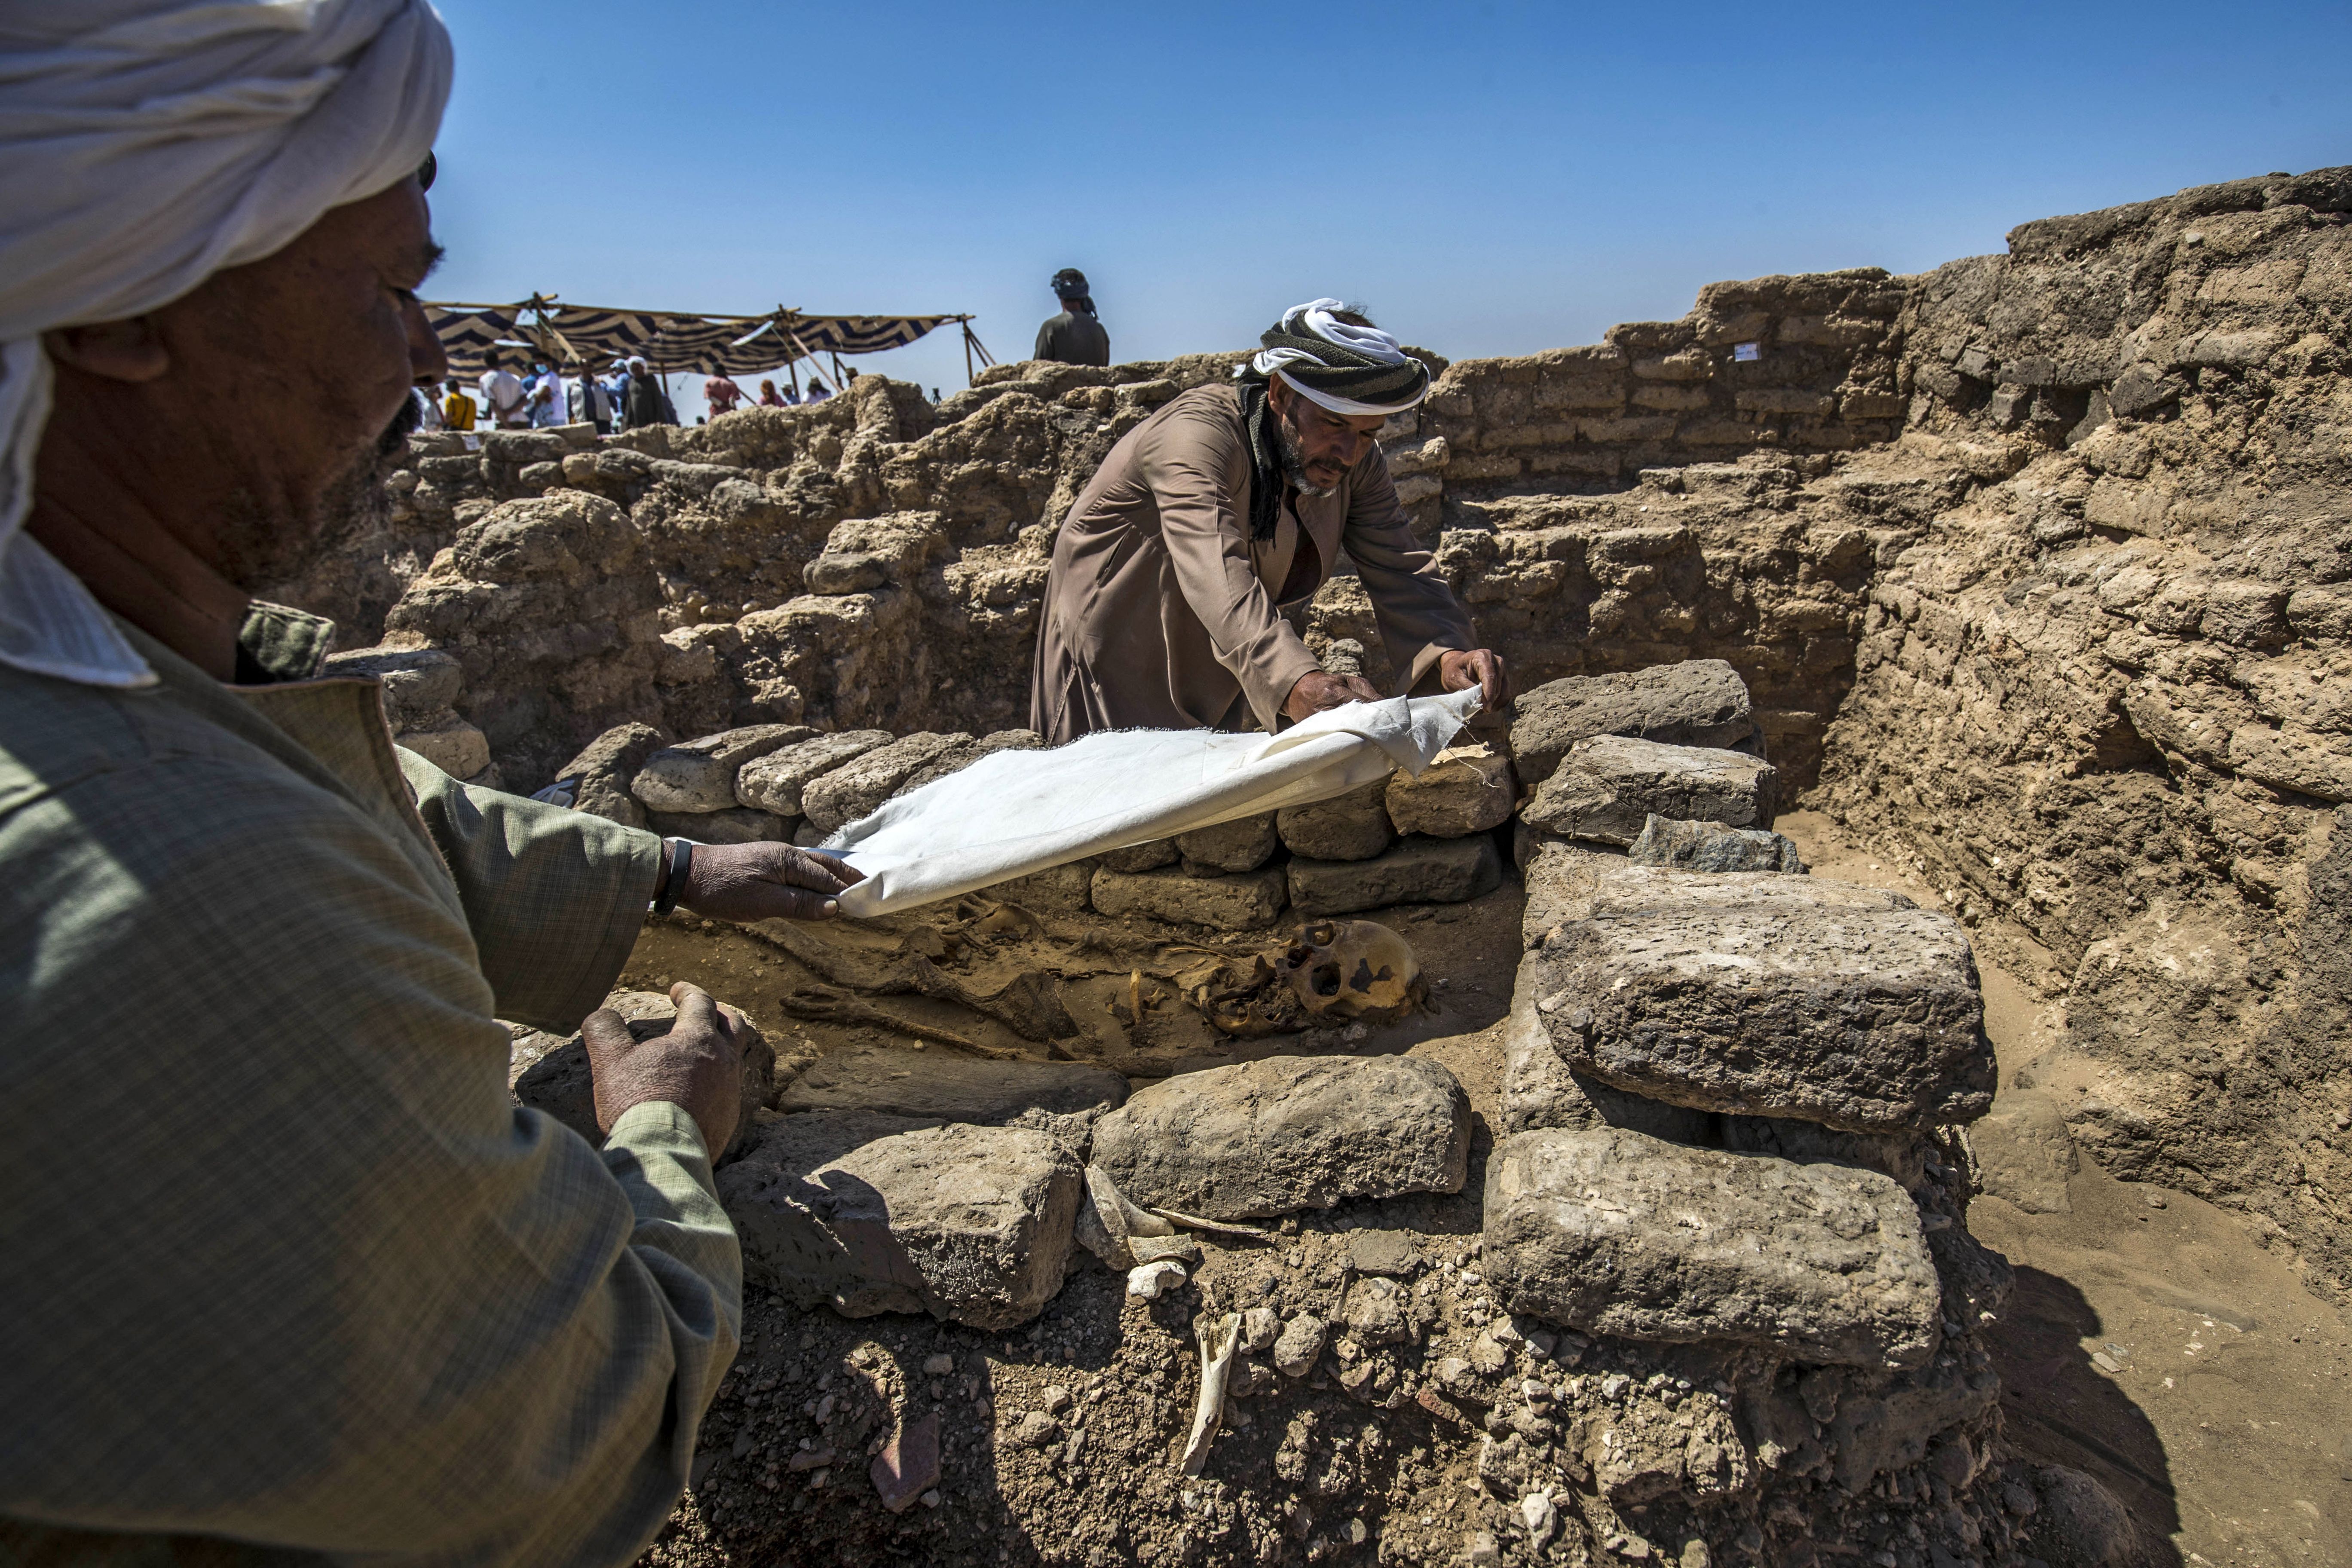 Workers covering a skeleton at the archaeological site of a 3000 year old city, dubbed The Rise of Aten, dating to the reign of Amenhotep III, uncovered by the Egyptian mission near Luxor. 